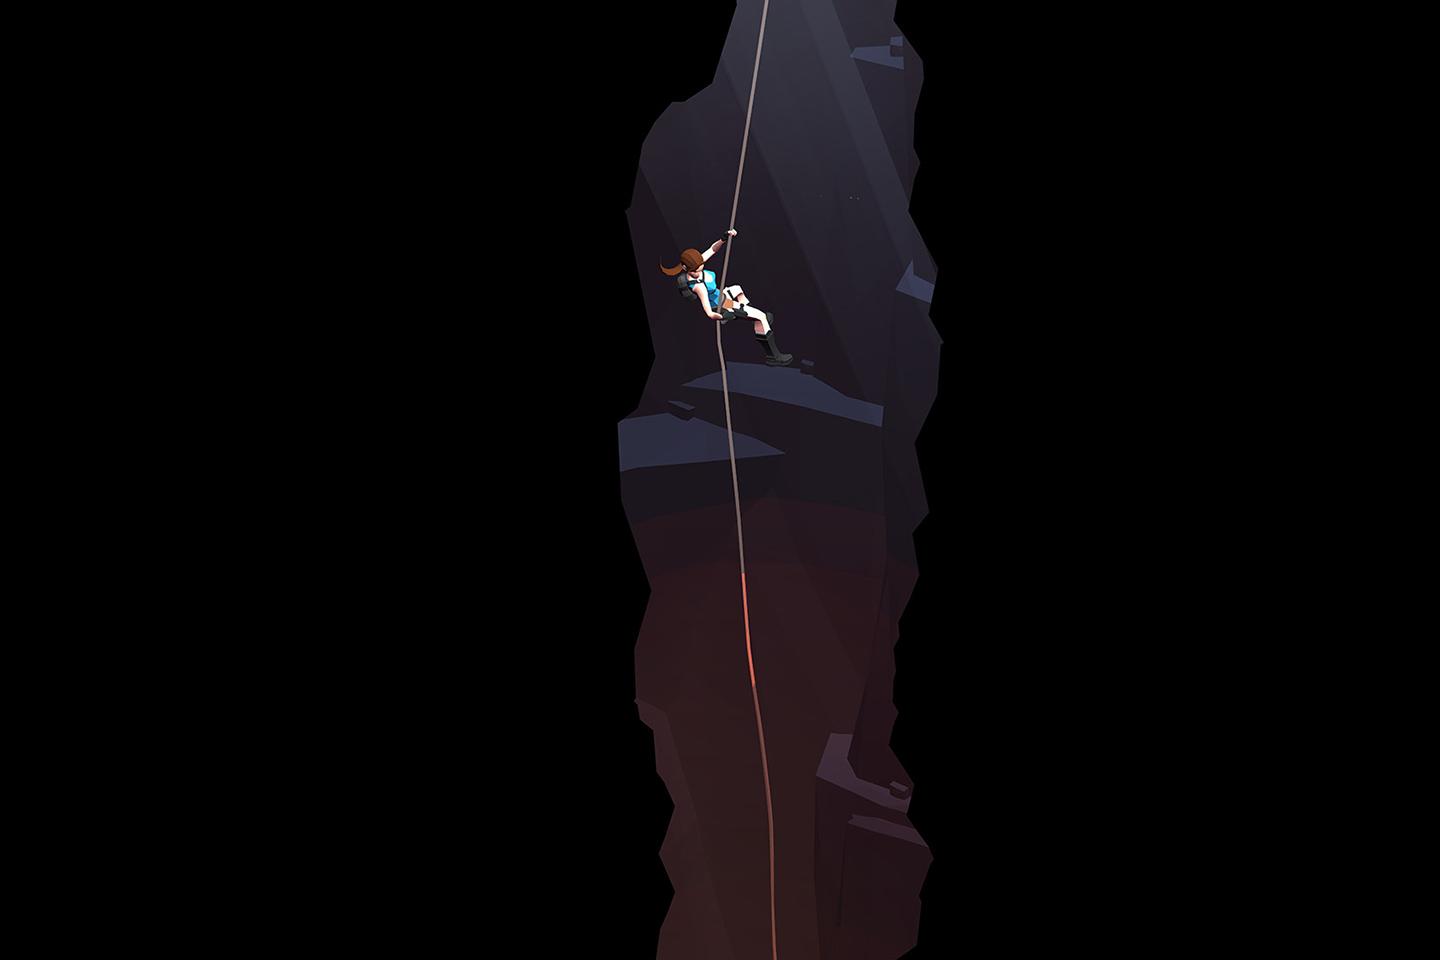 A minimalist game scene with a character rappelling down a deep chasm, highlighted by a single beam of light against the surrounding darkness.